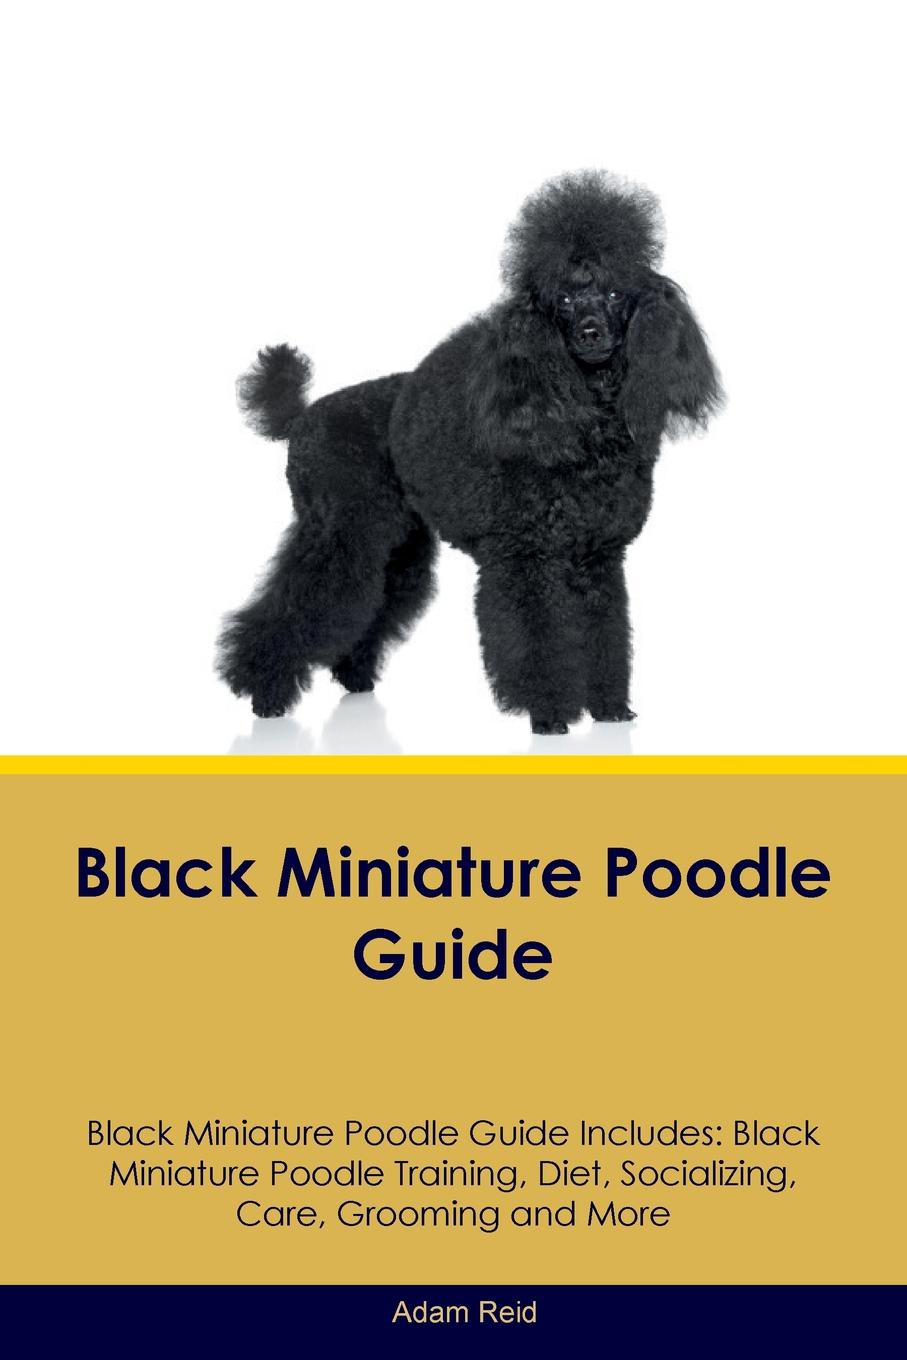 Black Miniature Poodle Guide Black Miniature Poodle Guide Includes. Black Miniature Poodle Training, Diet, Socializing, Care, Grooming, Breeding and More